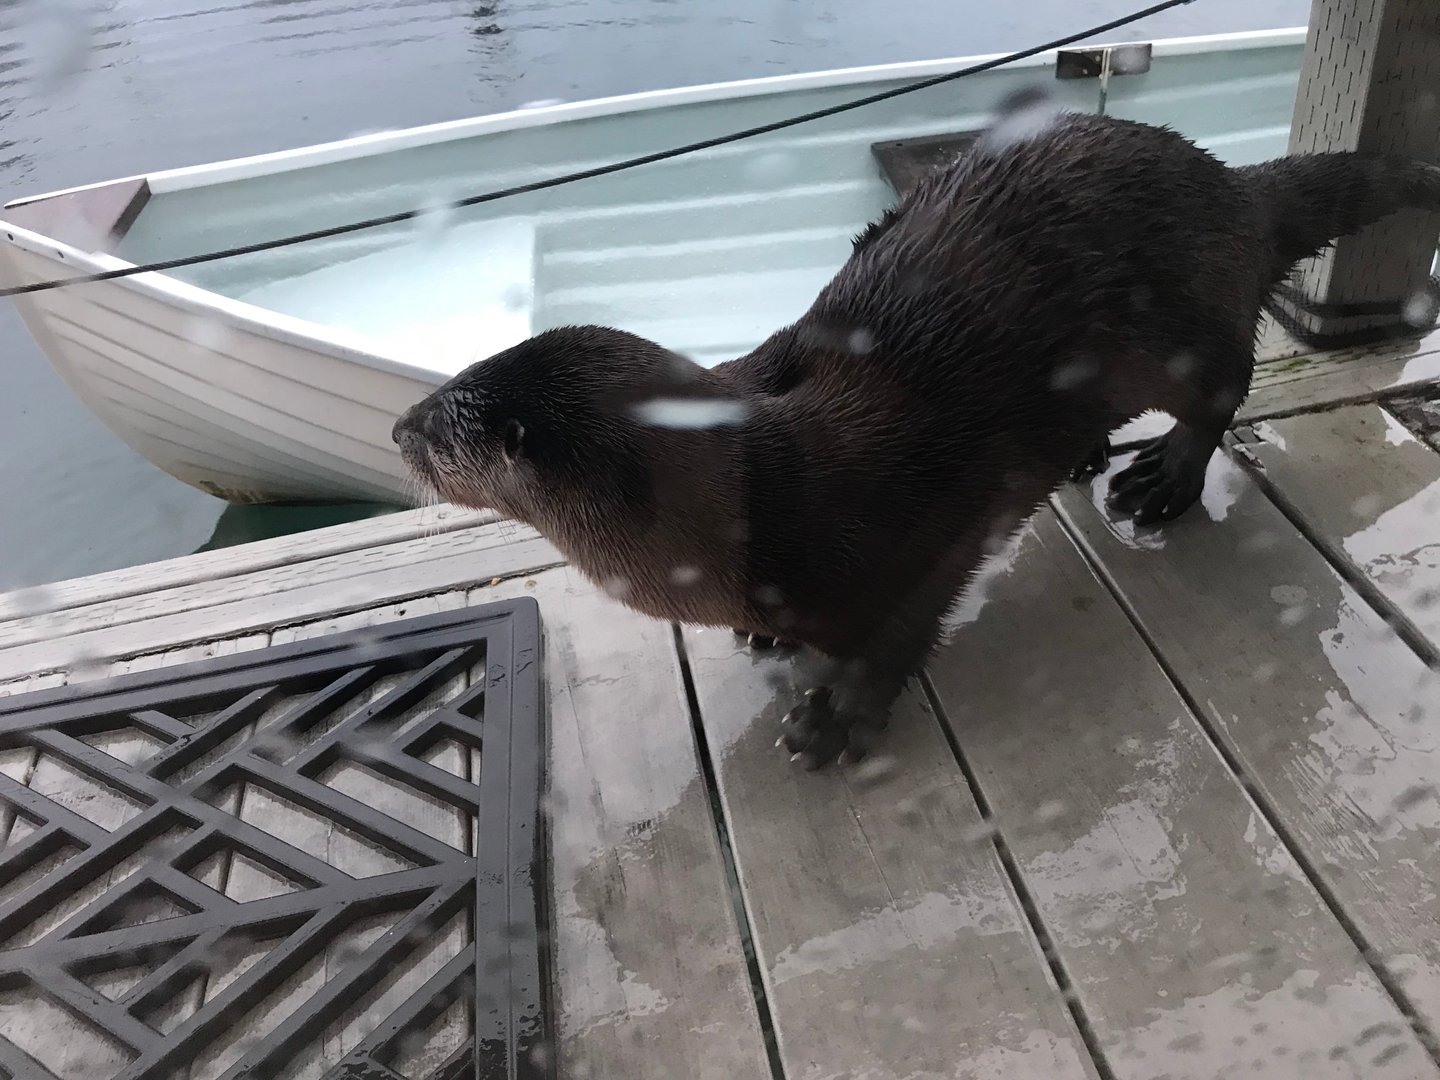 This photograph is a picture of an otter standing on a wet deck. It's peering over the edge of the deck at the water and a canoe